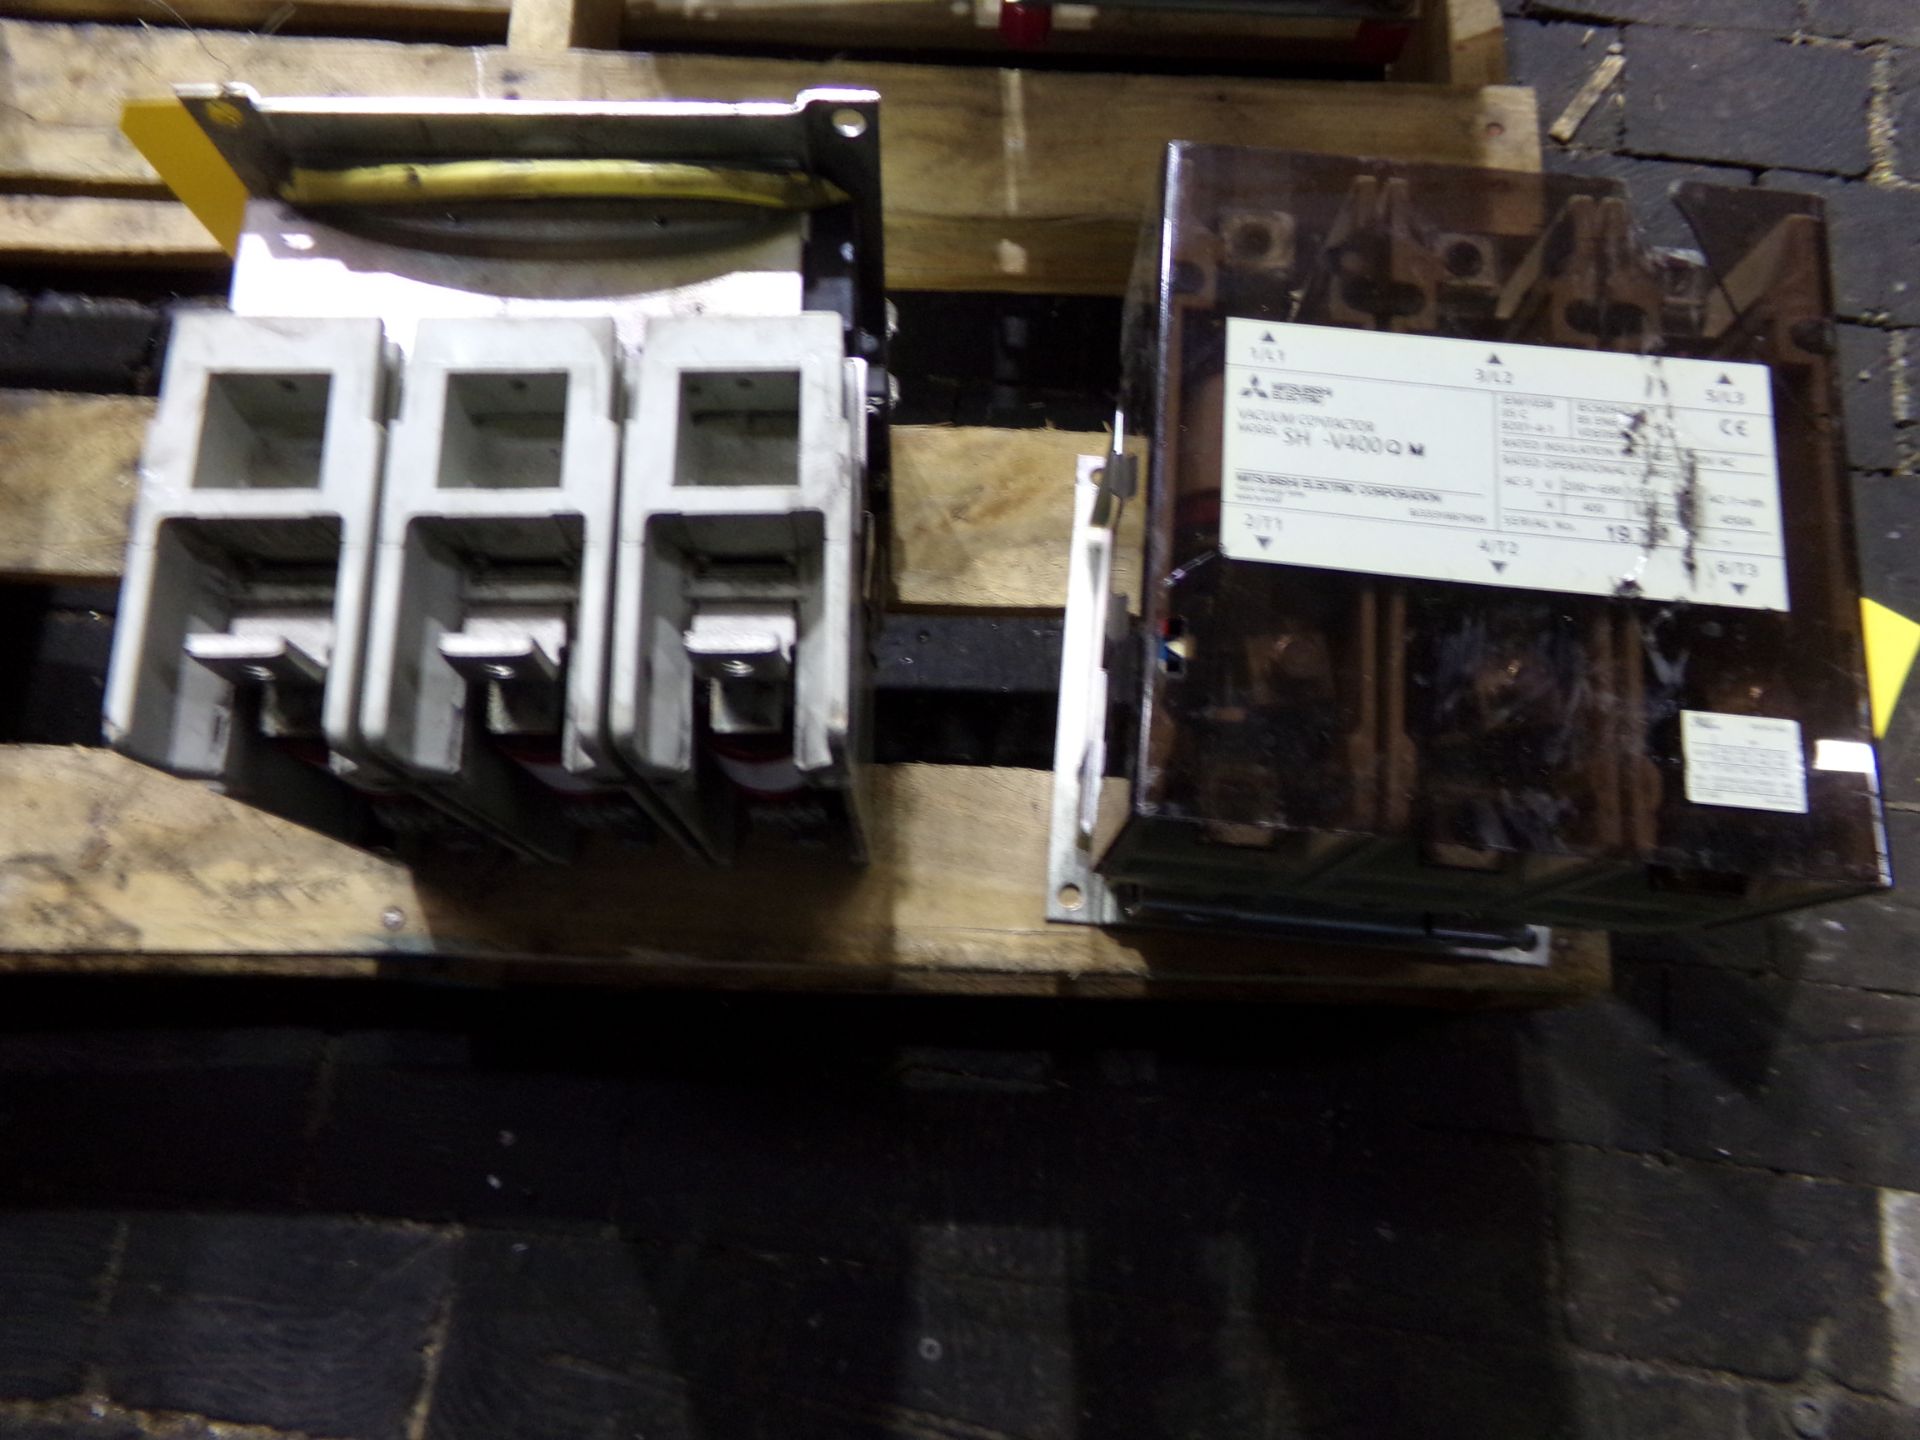 MITSUBISHI VACUUM CONTACTOR 2pc lot , one missing plastic cover MODEL SHV-400QM RATED INSULATION - Image 2 of 6